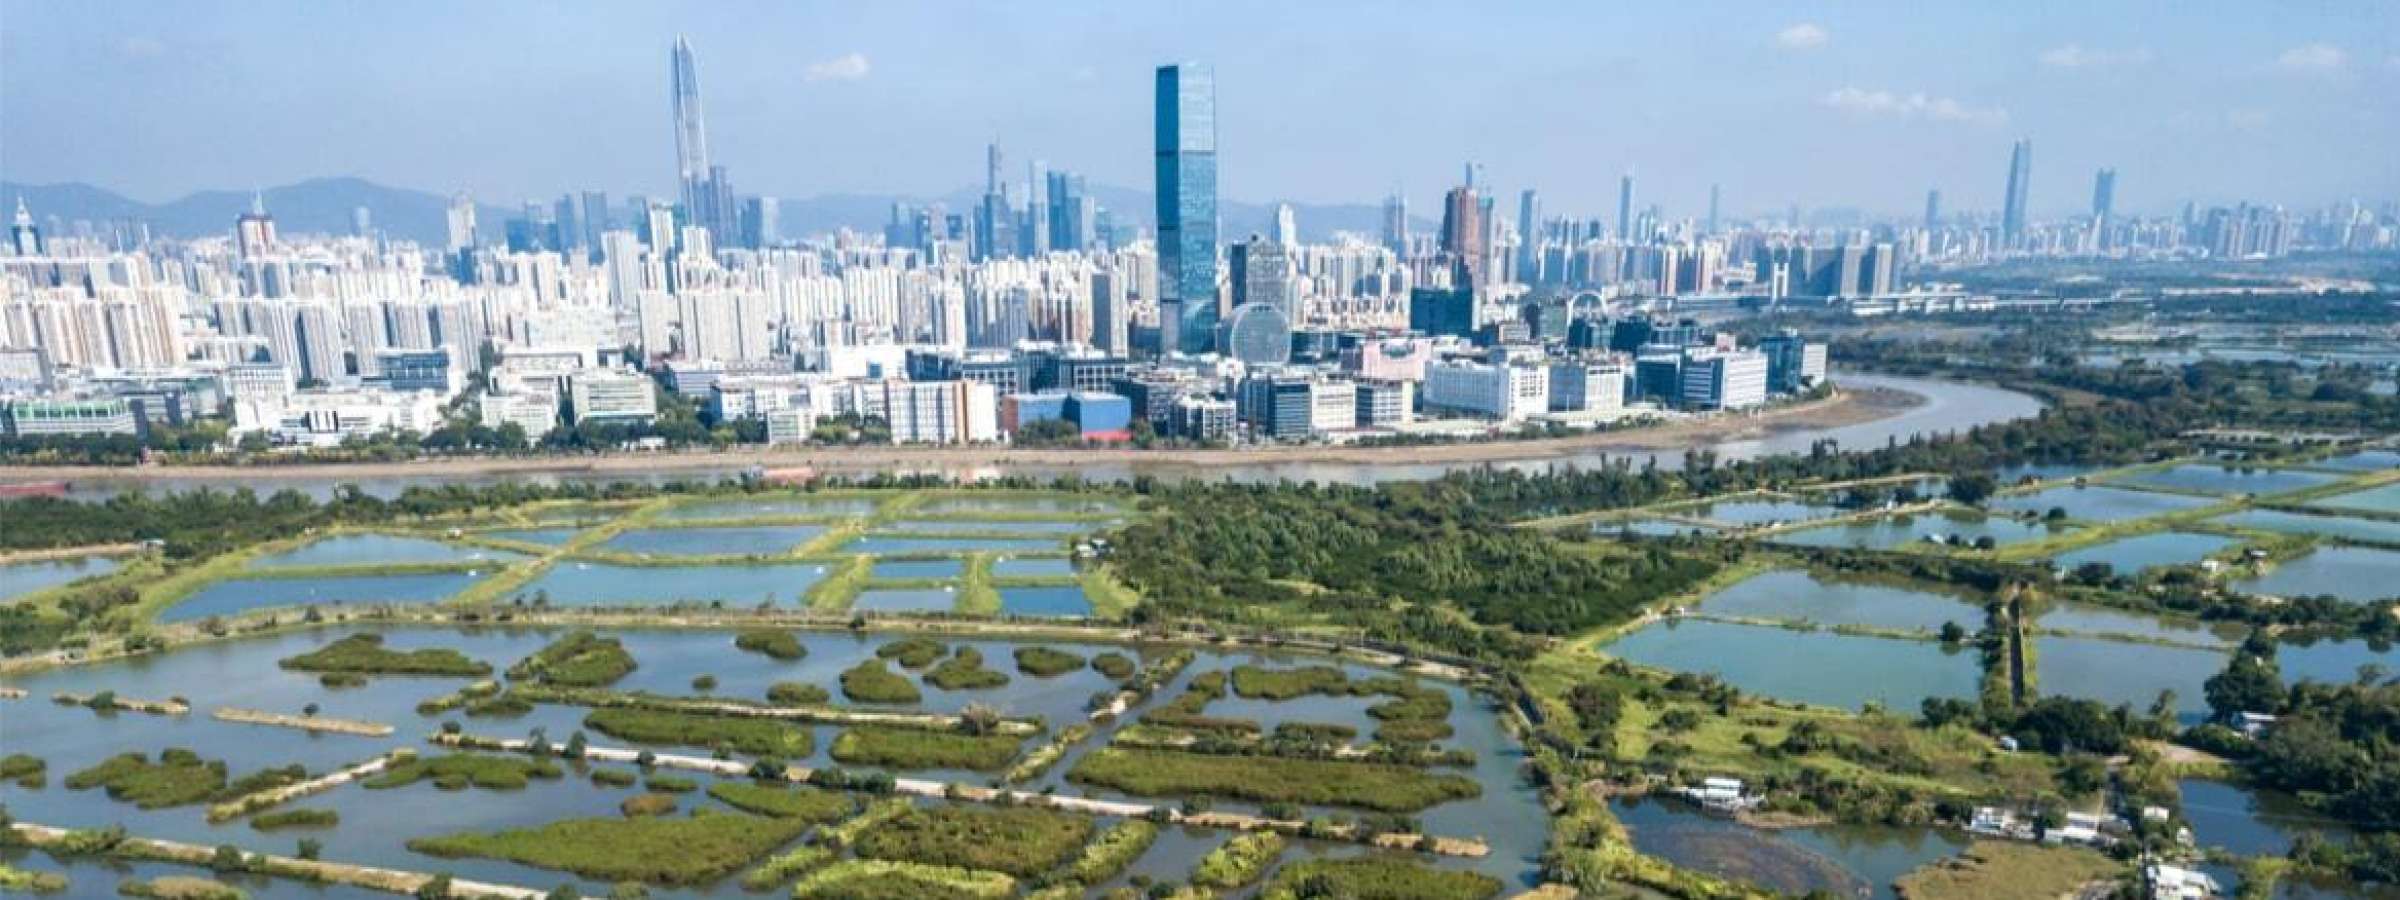 An aerial view of the Mai Po nature reserve beside Shenzen City, China